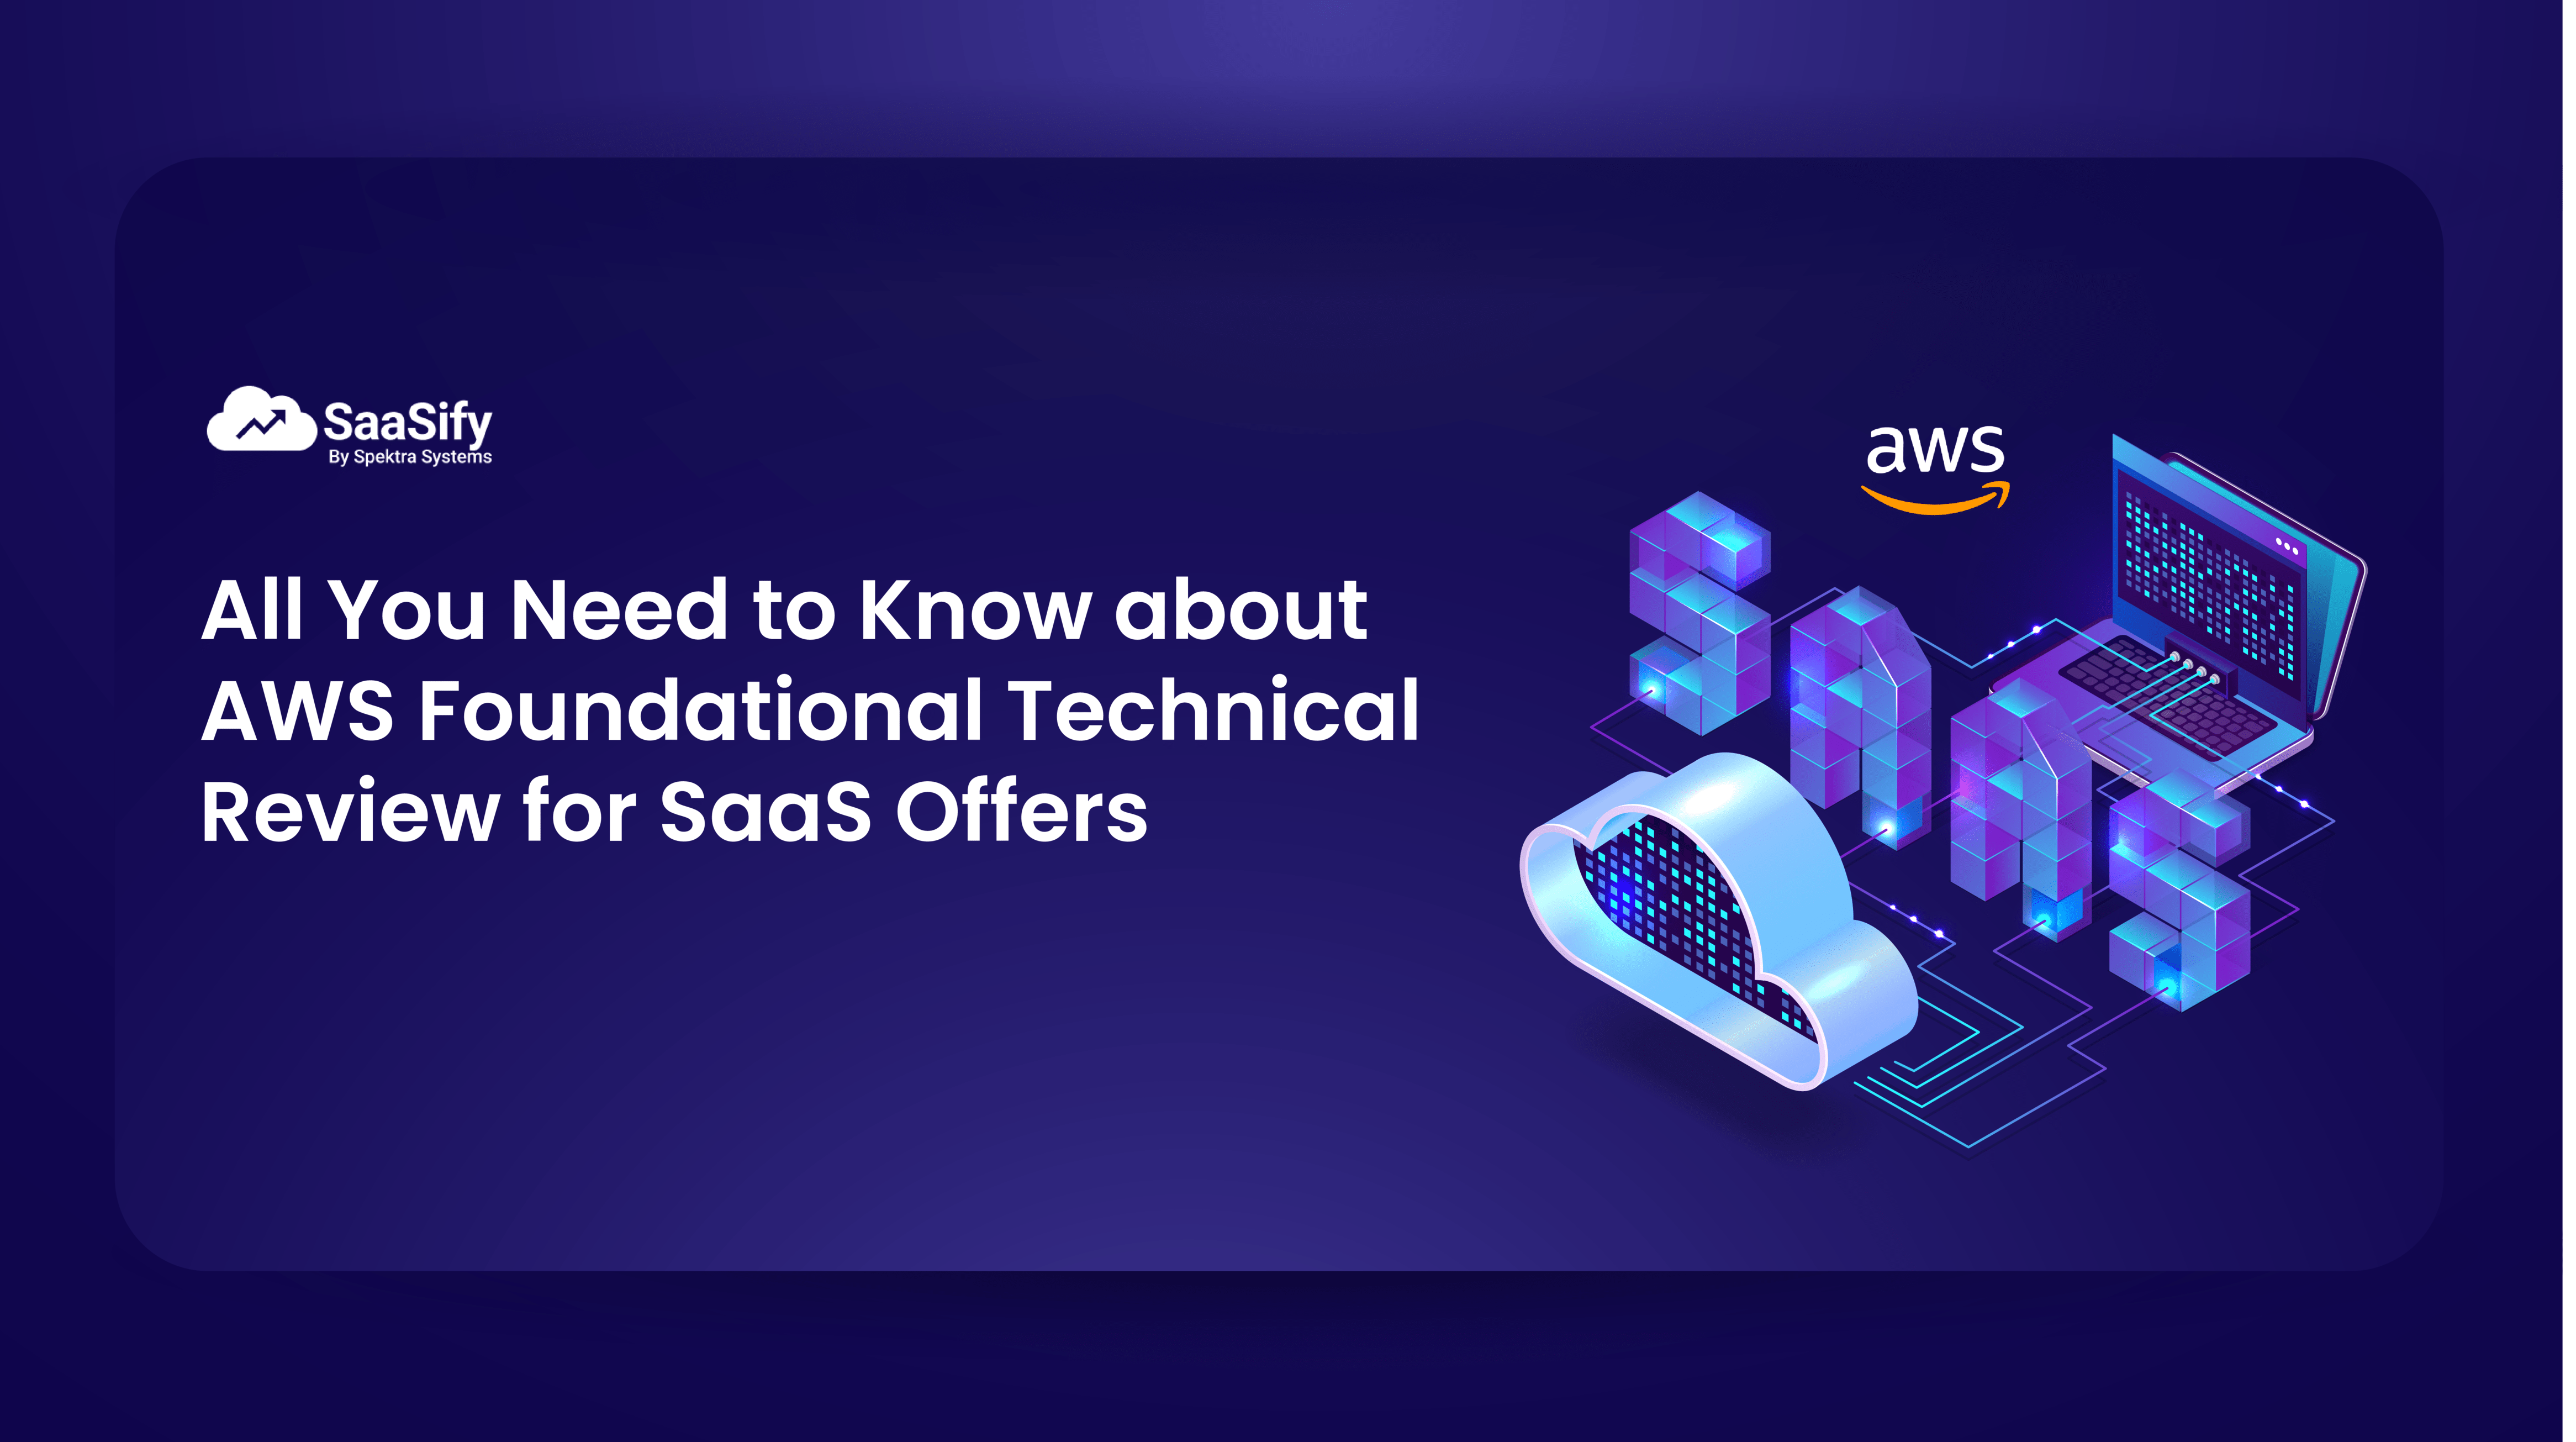 All You Need to Know about AWS Foundational Technical Review for SaaS Offers